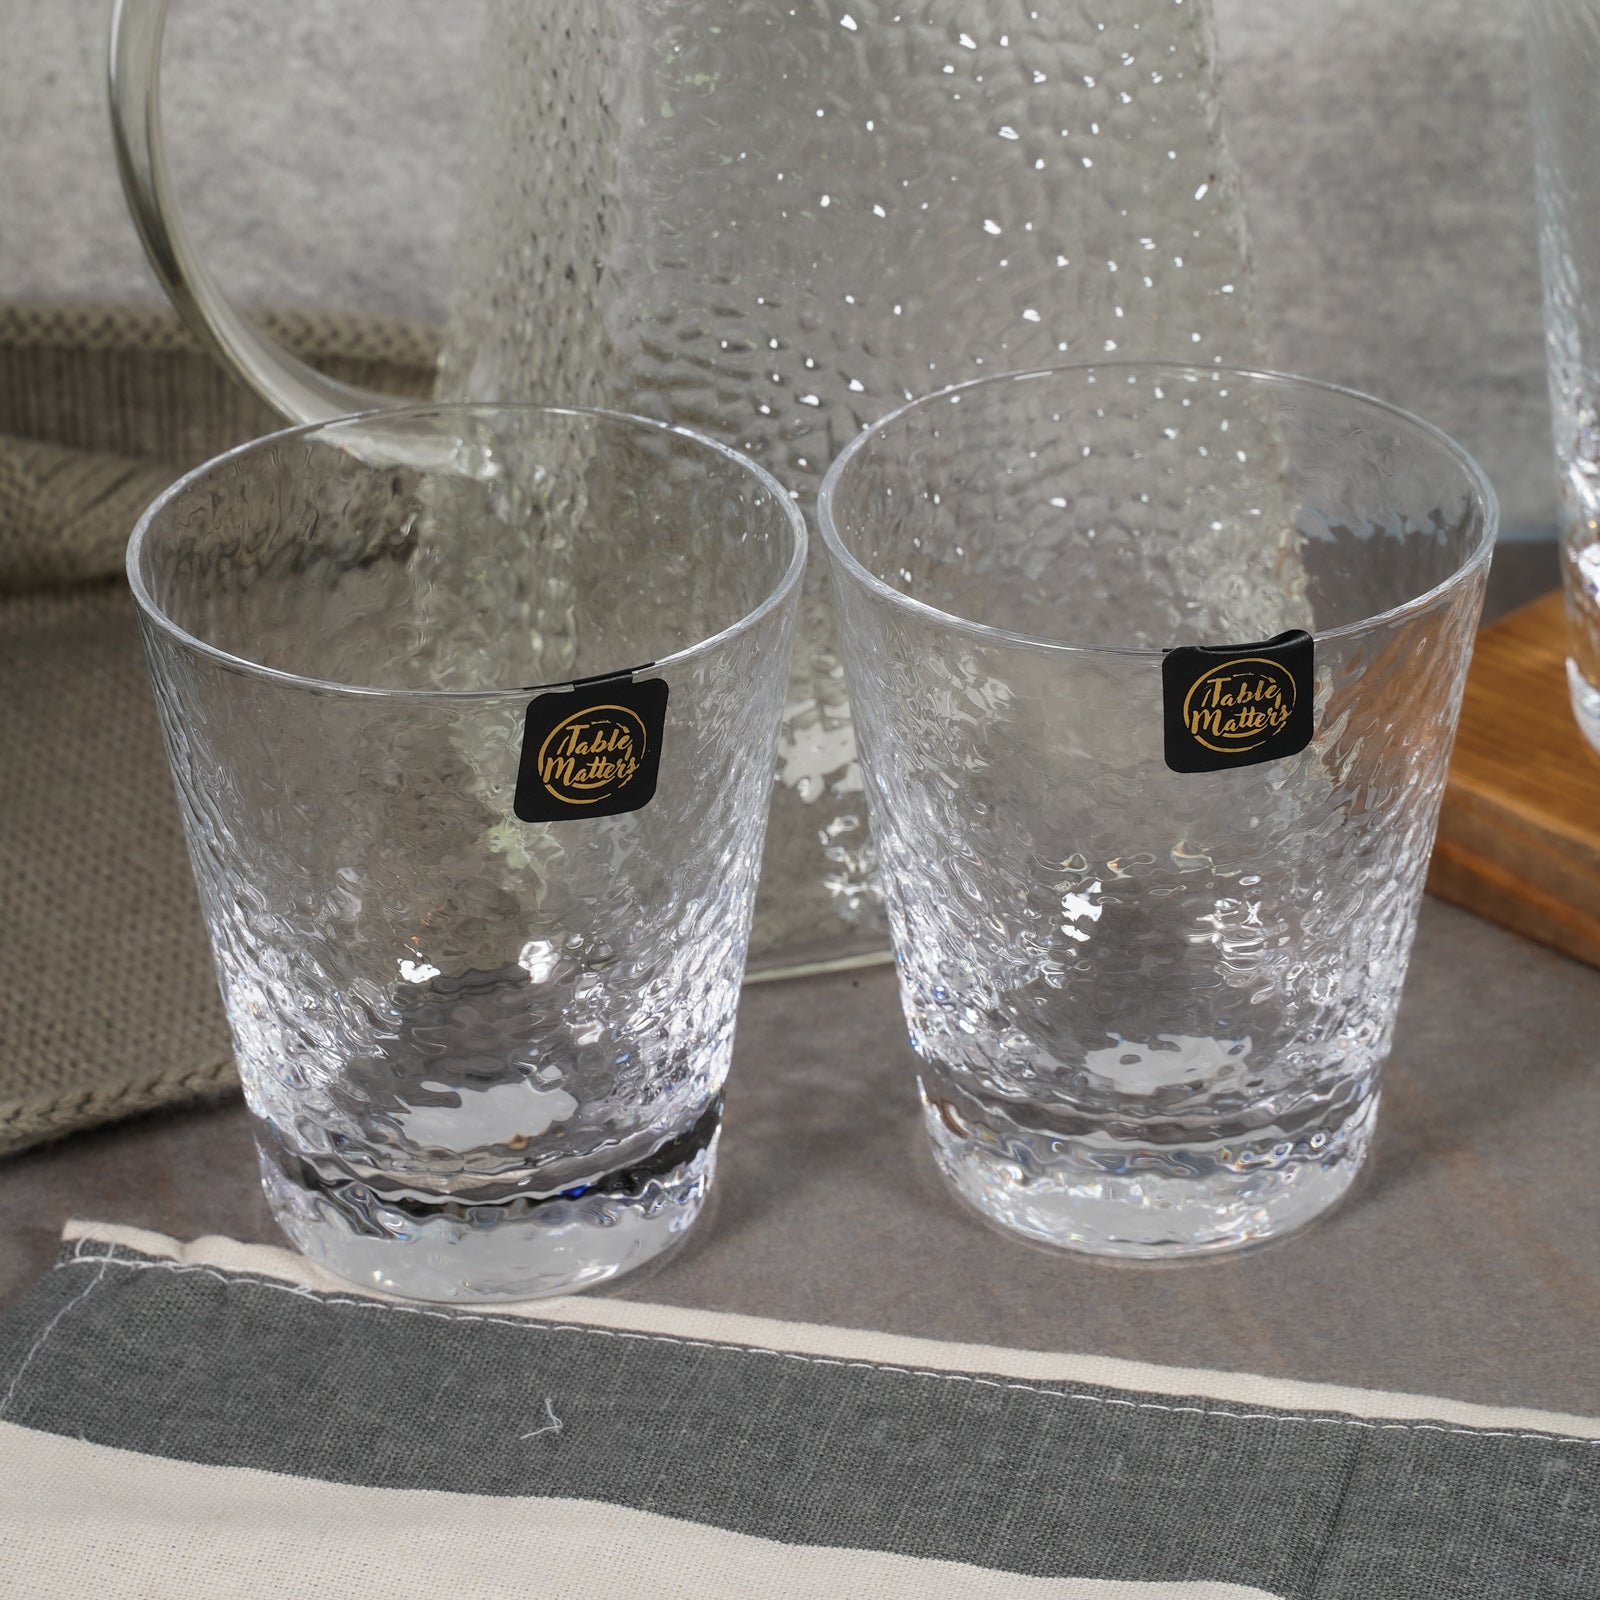 Bundle Deal for 2 - Tsuchi Drinking Glass and Jug - Set of 5